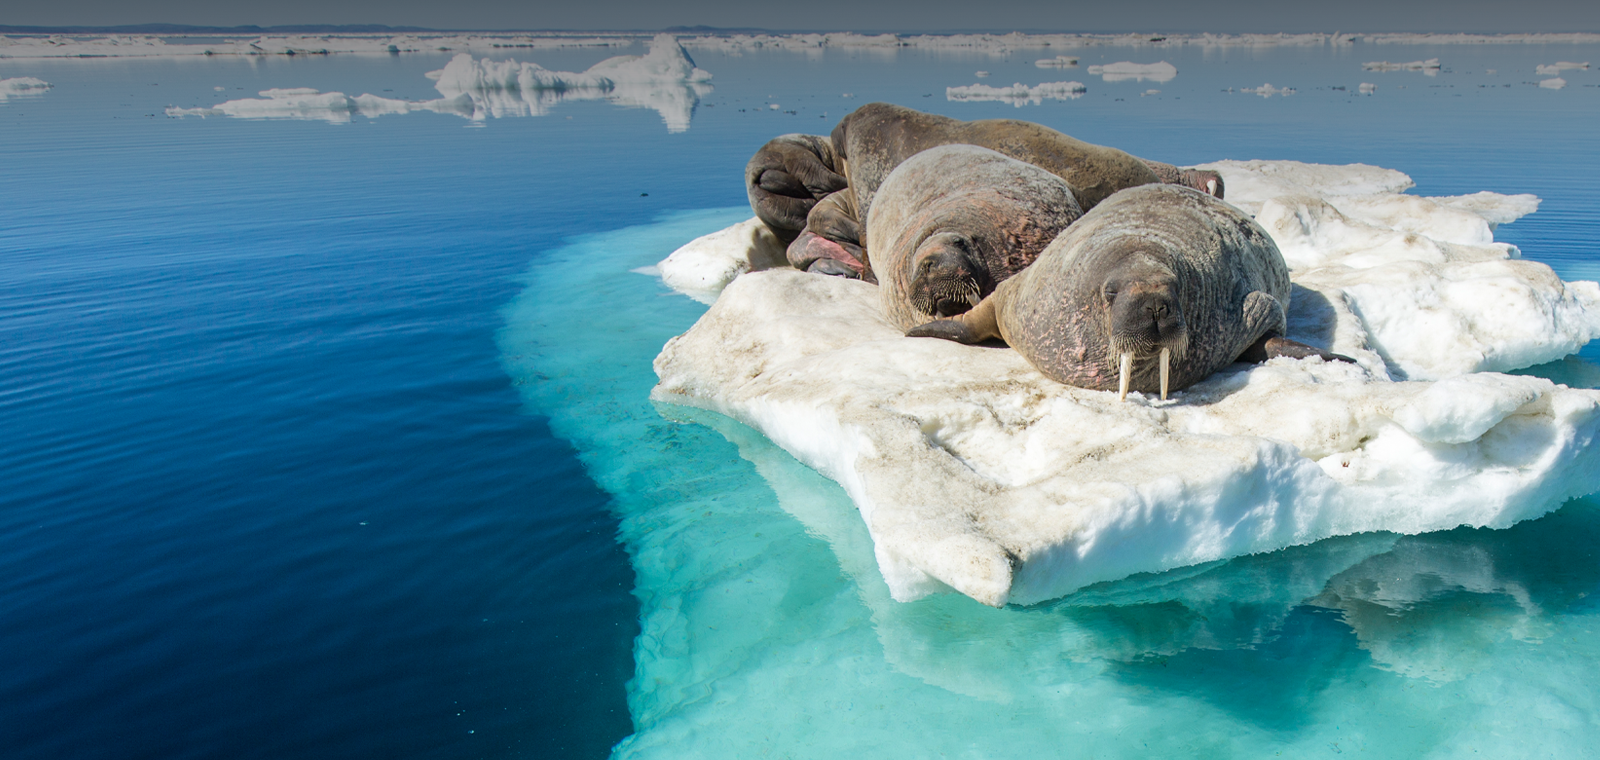 A group of walruses lay on a floating iceberg in a turquoise Arctic sea.